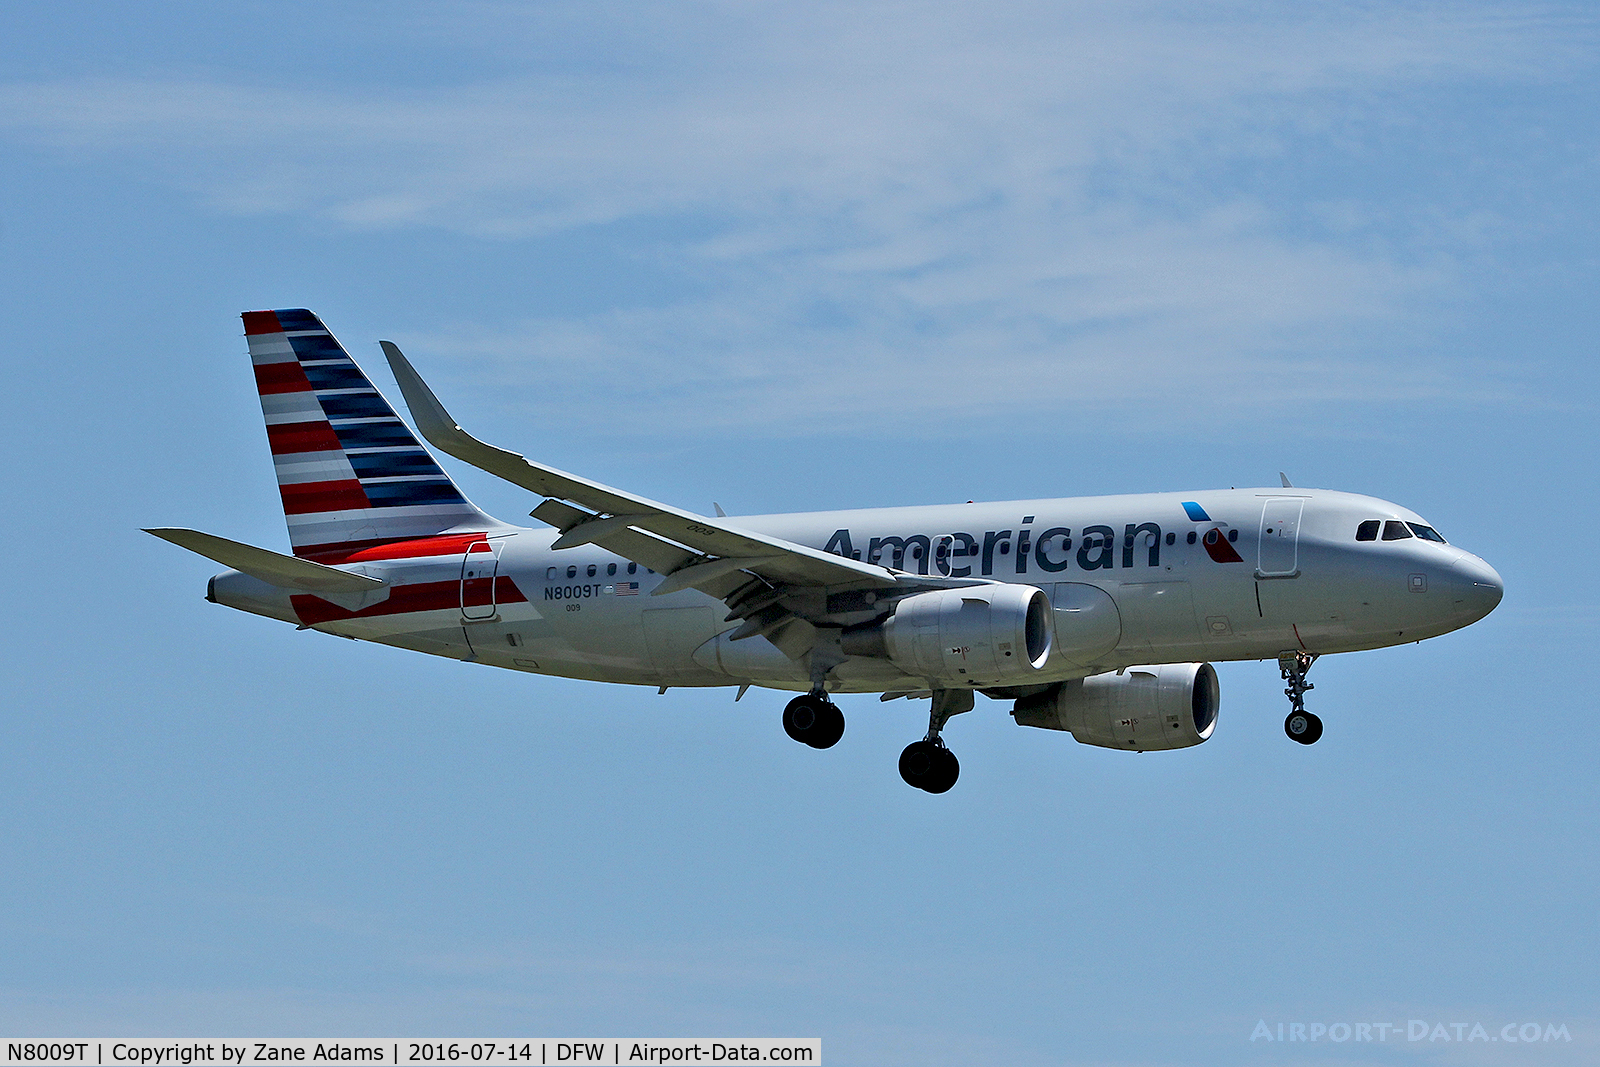 N8009T, 2013 Airbus A319-115 C/N 5788, Arriving at DFW Airport - Fort Worth, Texas